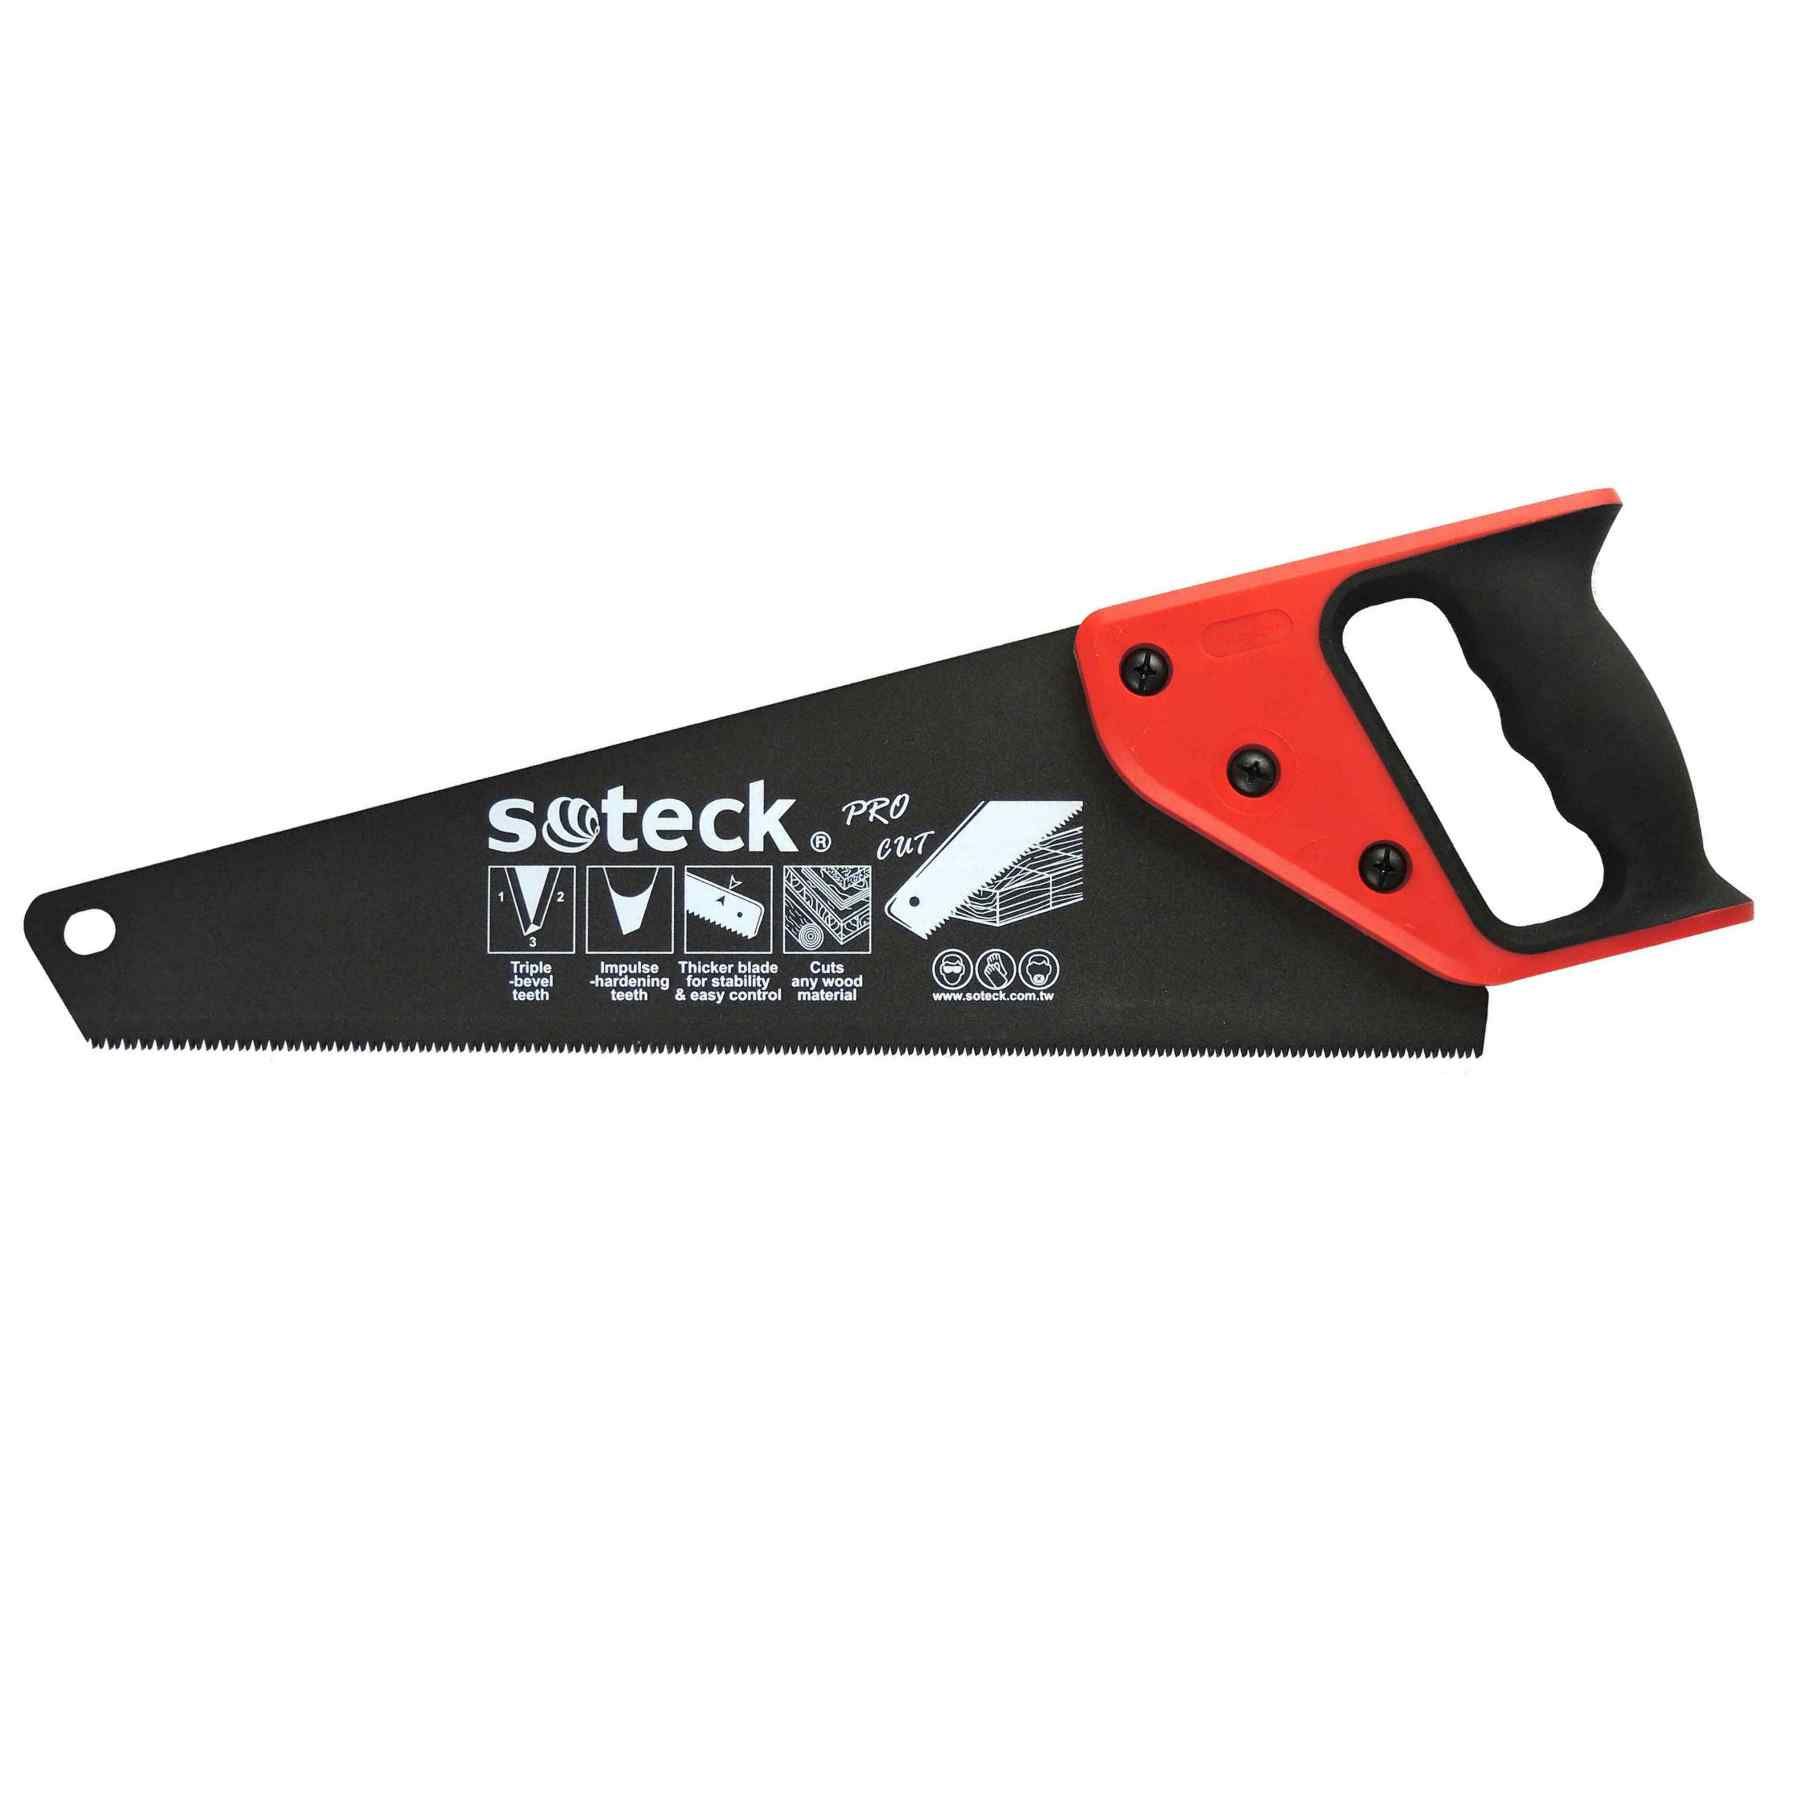 Friction Coated Hand Saw Carpenter Saw Western Hand Saw Soteck A Professional Manufacturer Of A Wide Variety Of High Quality Hand Operated Saws Pruning Saws Hand Saws Hacksaws Utility Knives Pruning